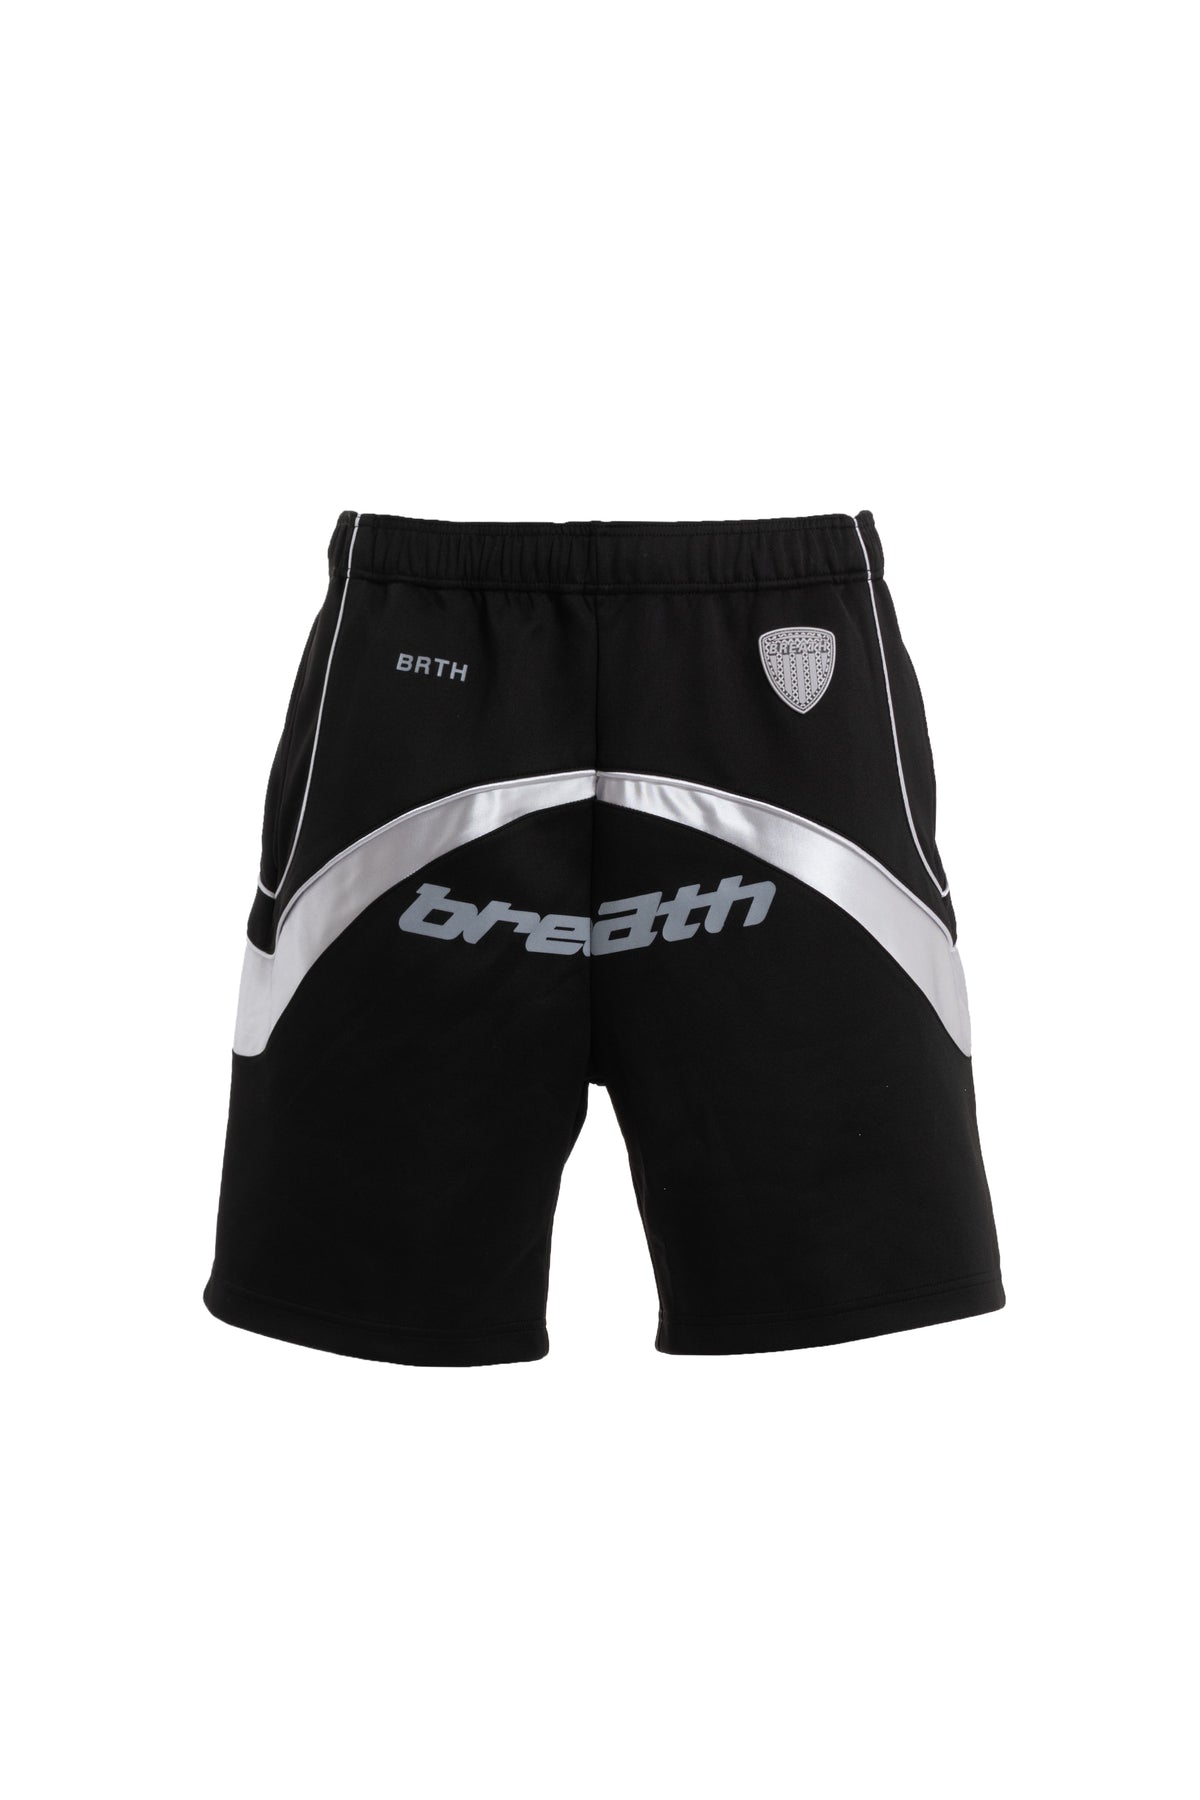 GAME SHORTS / BLK